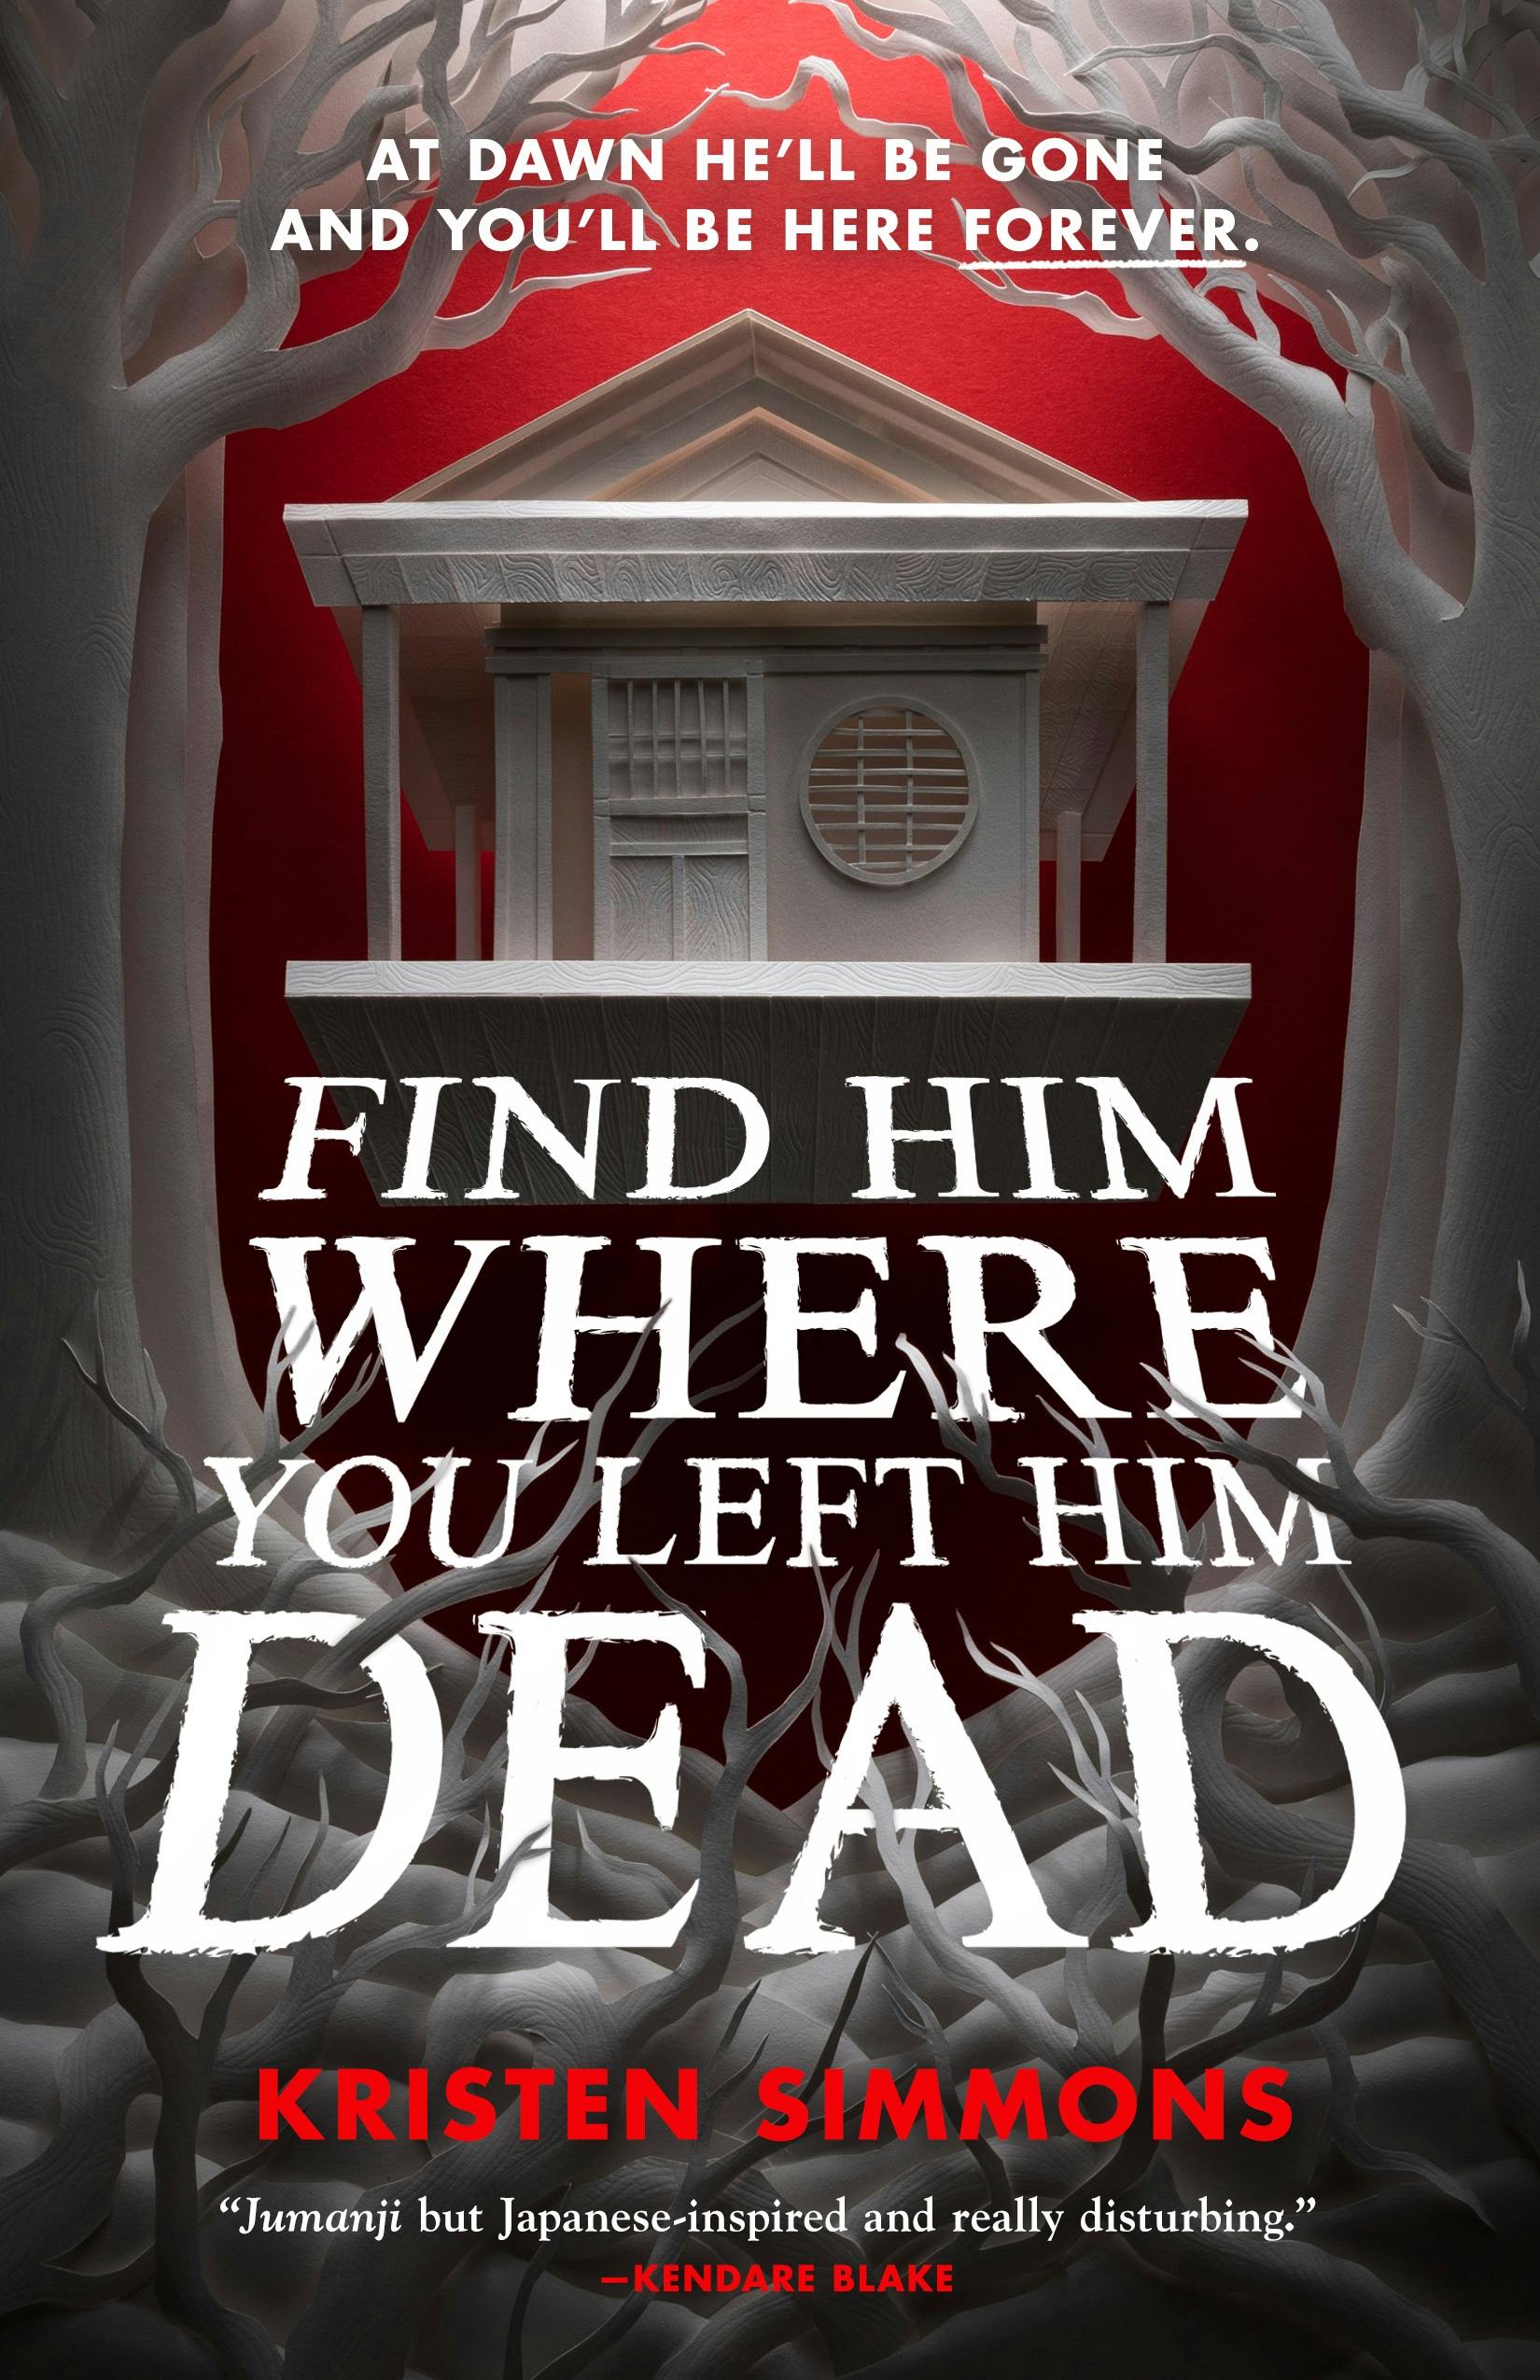 Cover for the book titled as: Find Him Where You Left Him Dead